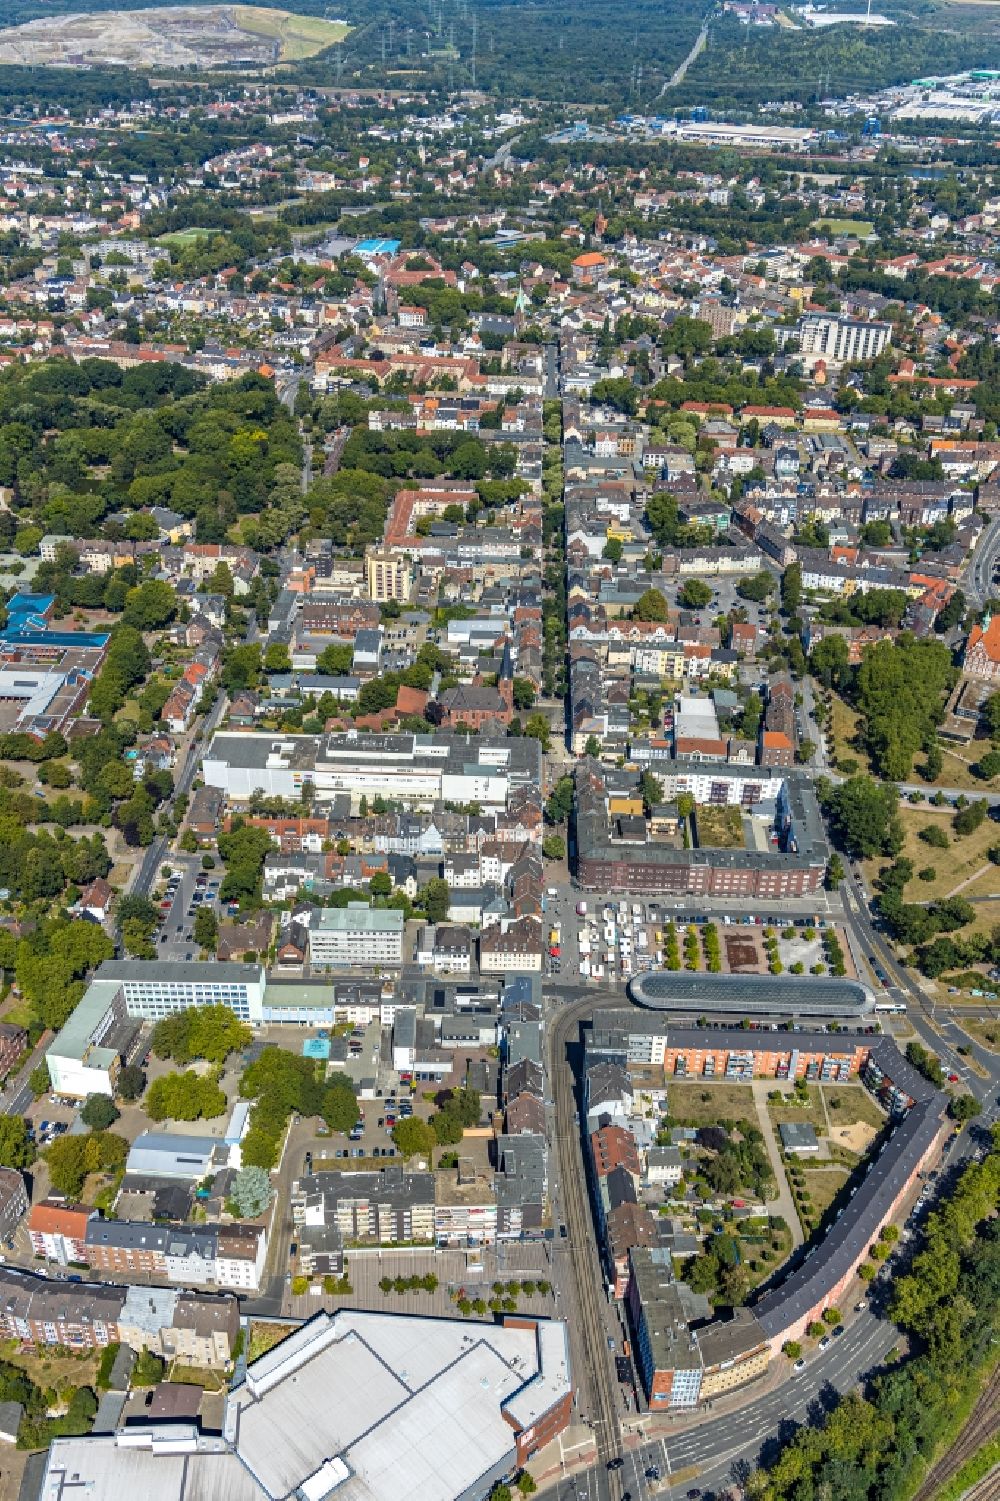 Aerial image Herne - The city center in the downtown area along the Hauptstrasse overlooking the public transport stop Buschmannshof in the district Wanne-Eickel in Herne in the state North Rhine-Westphalia, Germany